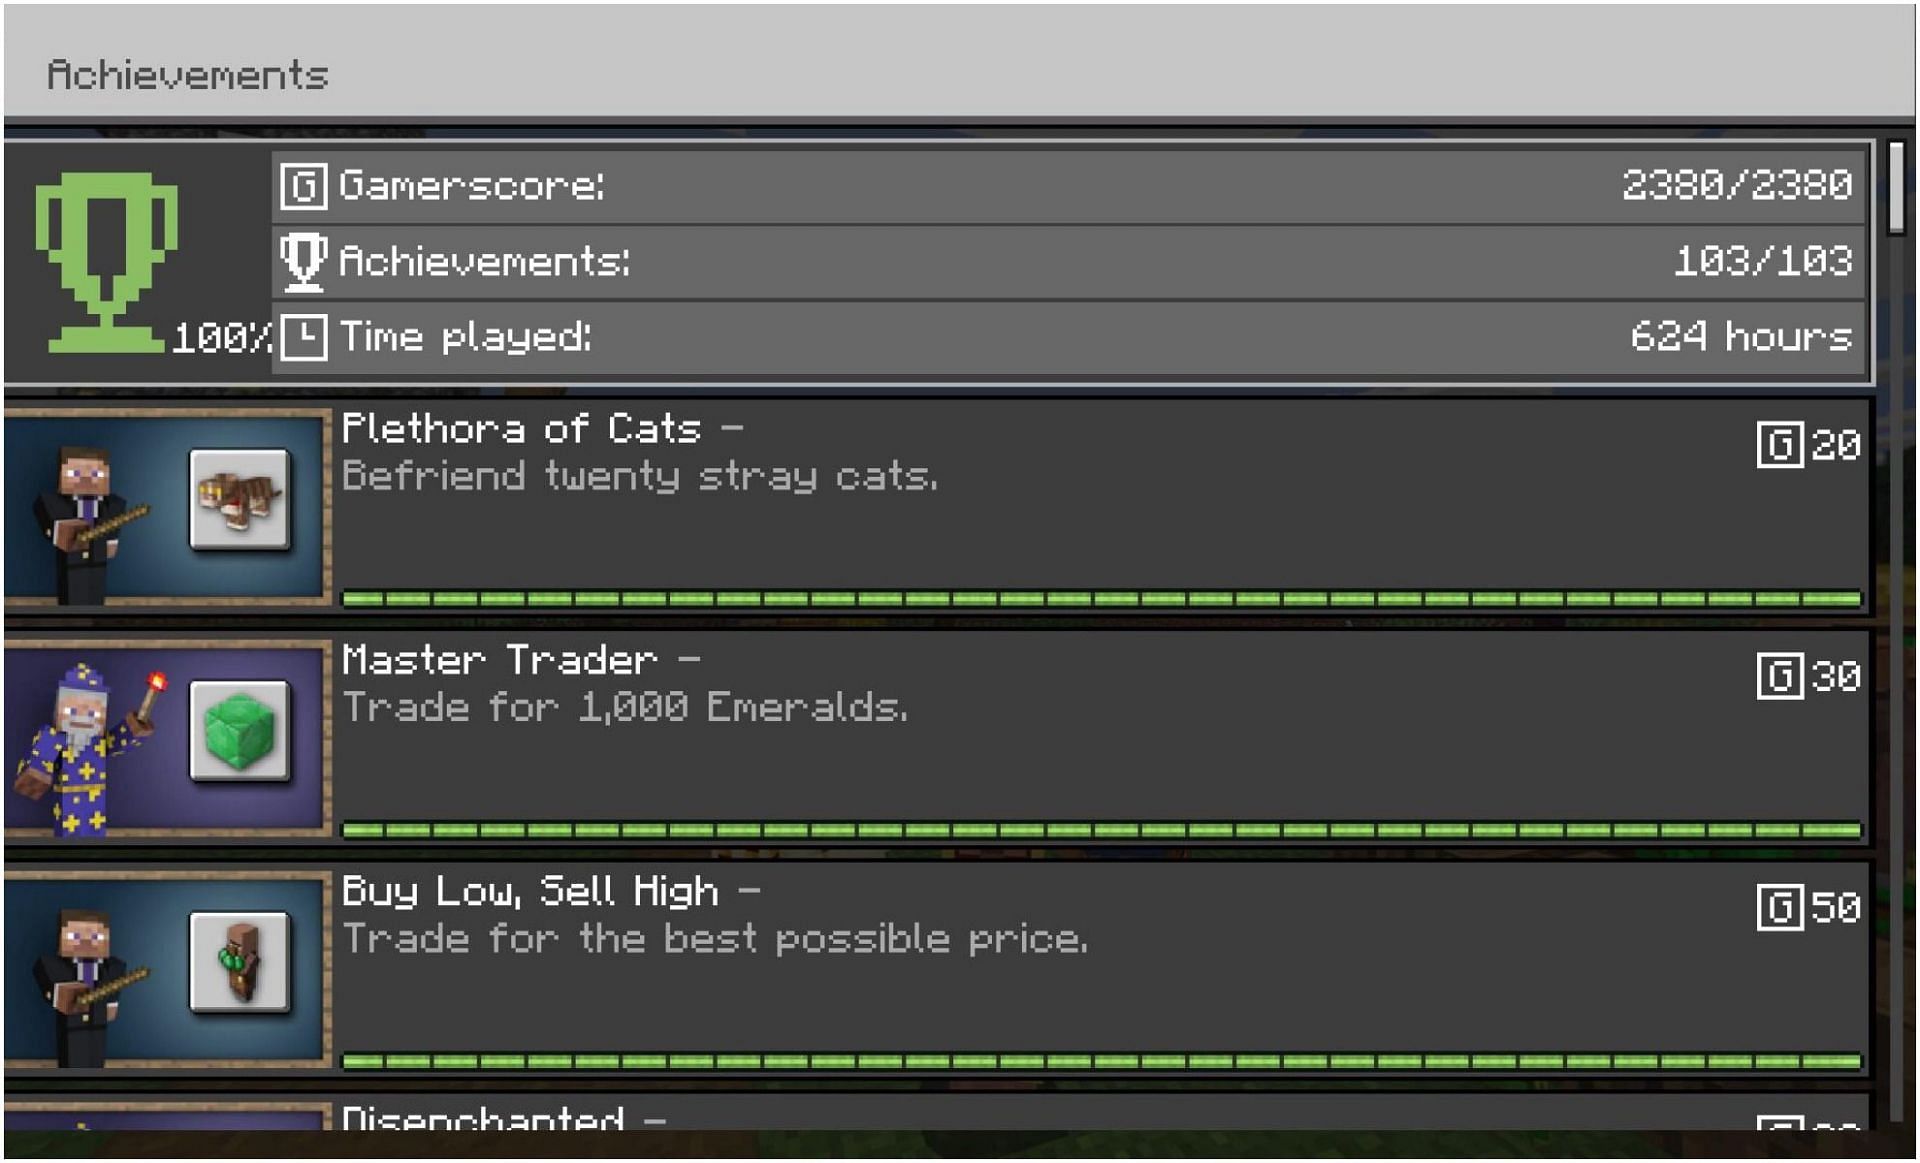 Achievements are an important part of Minecraft (Image via Minecraft)